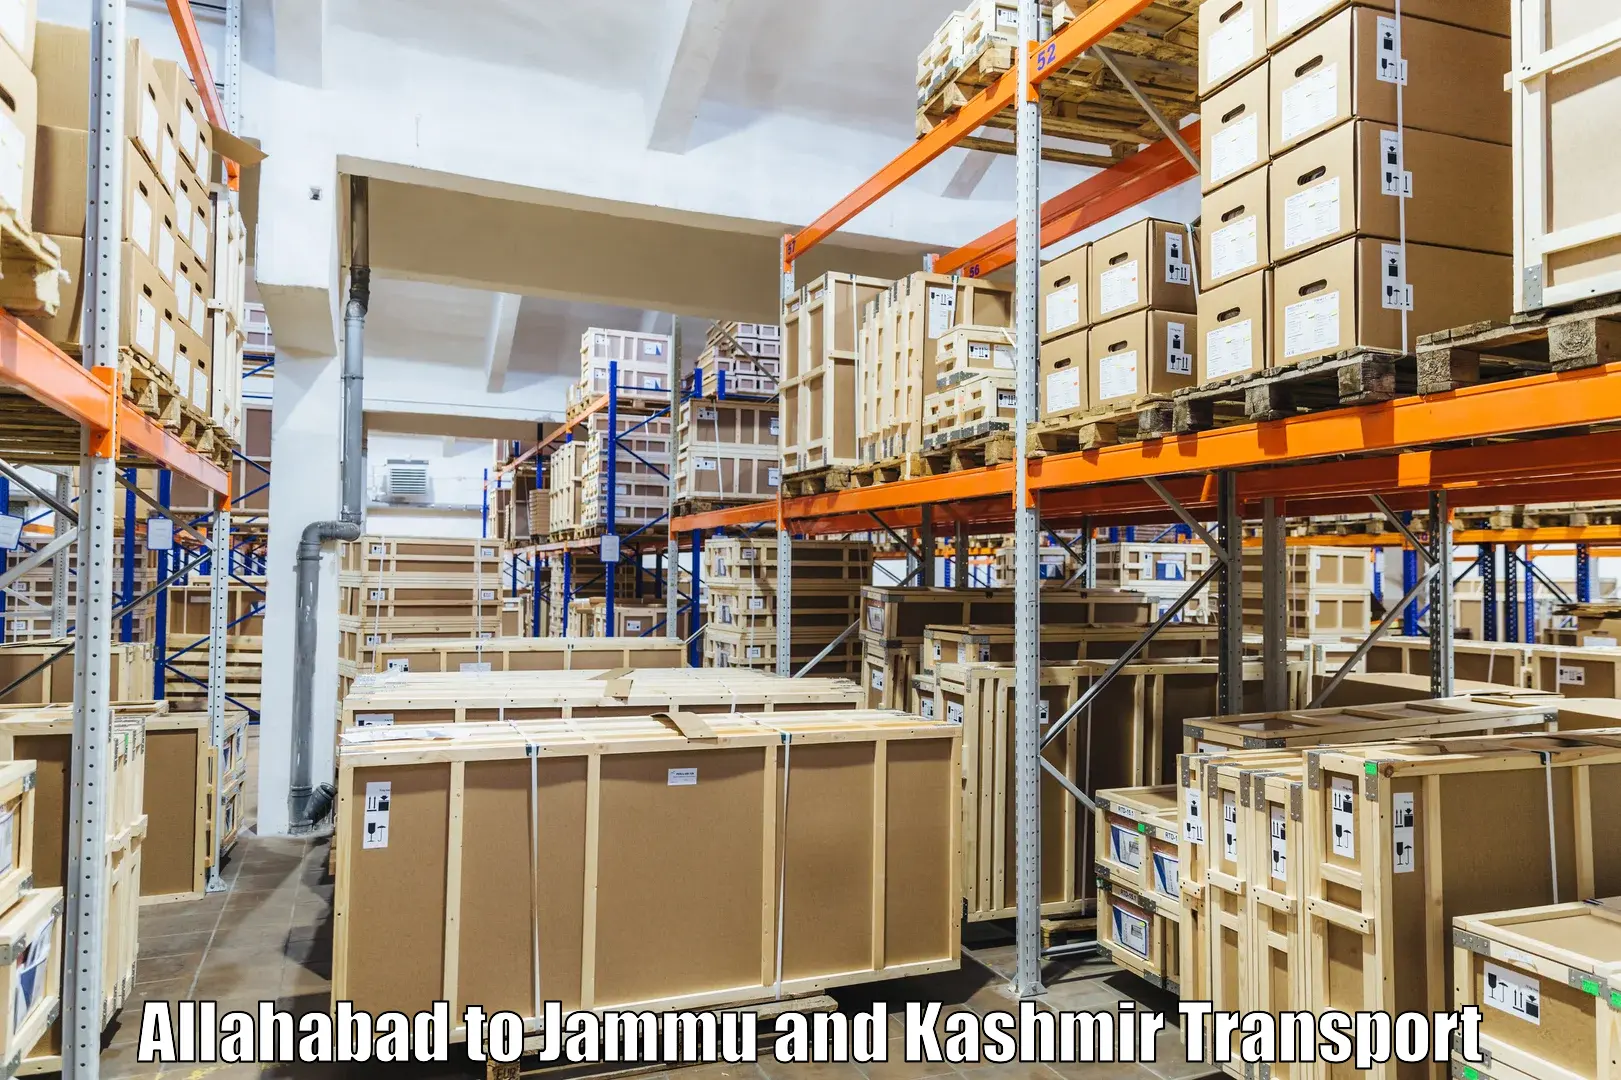 Truck transport companies in India Allahabad to Leh